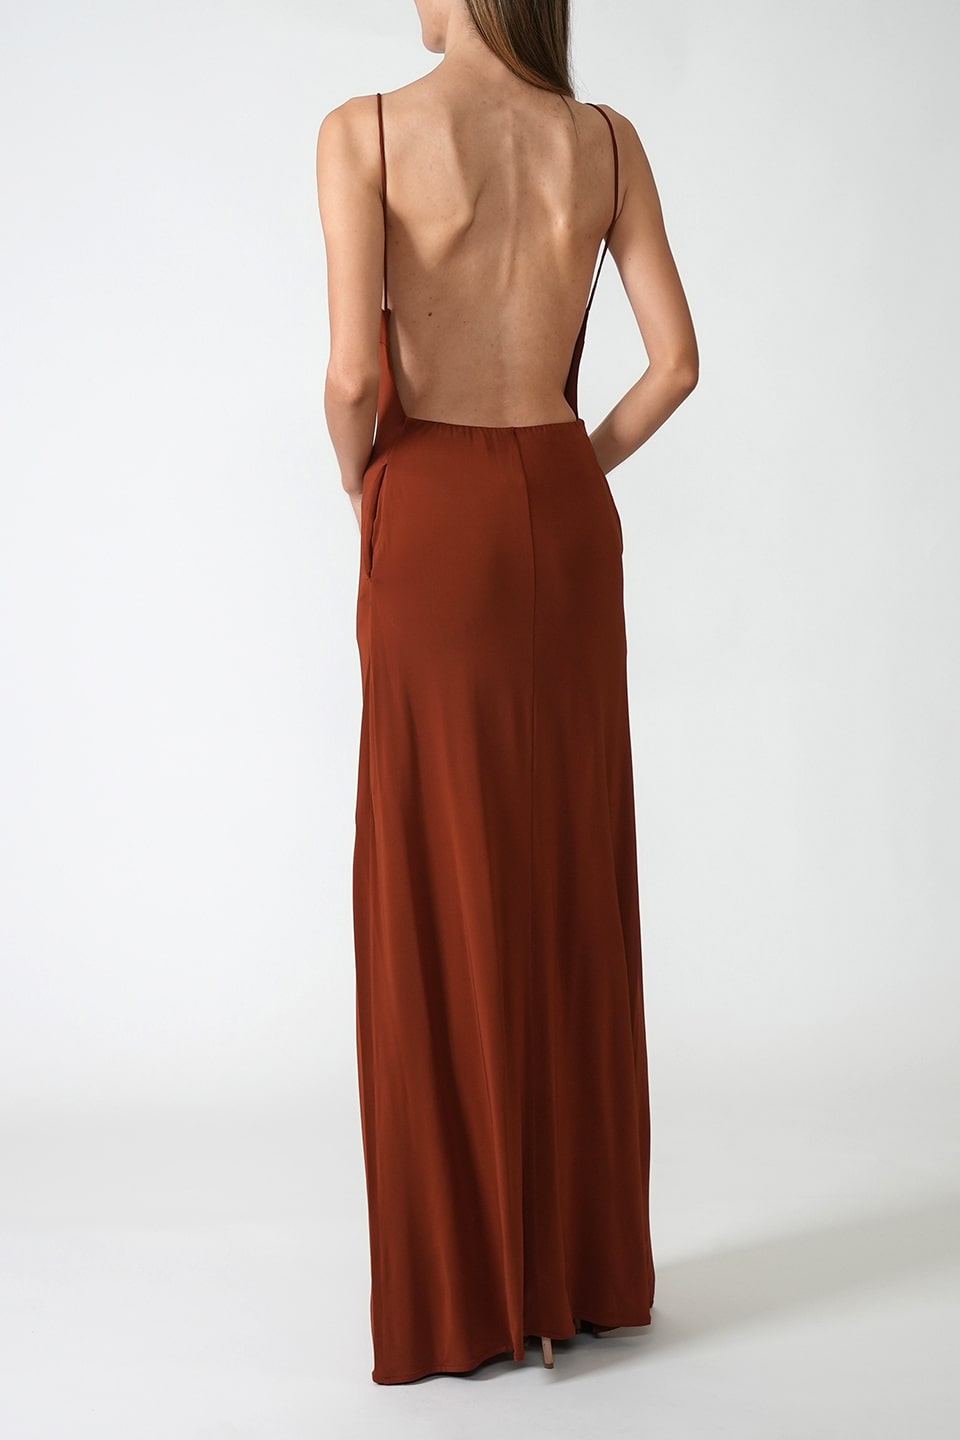 Thumbnail for Product gallery 5, Backless Long Dress Bronze